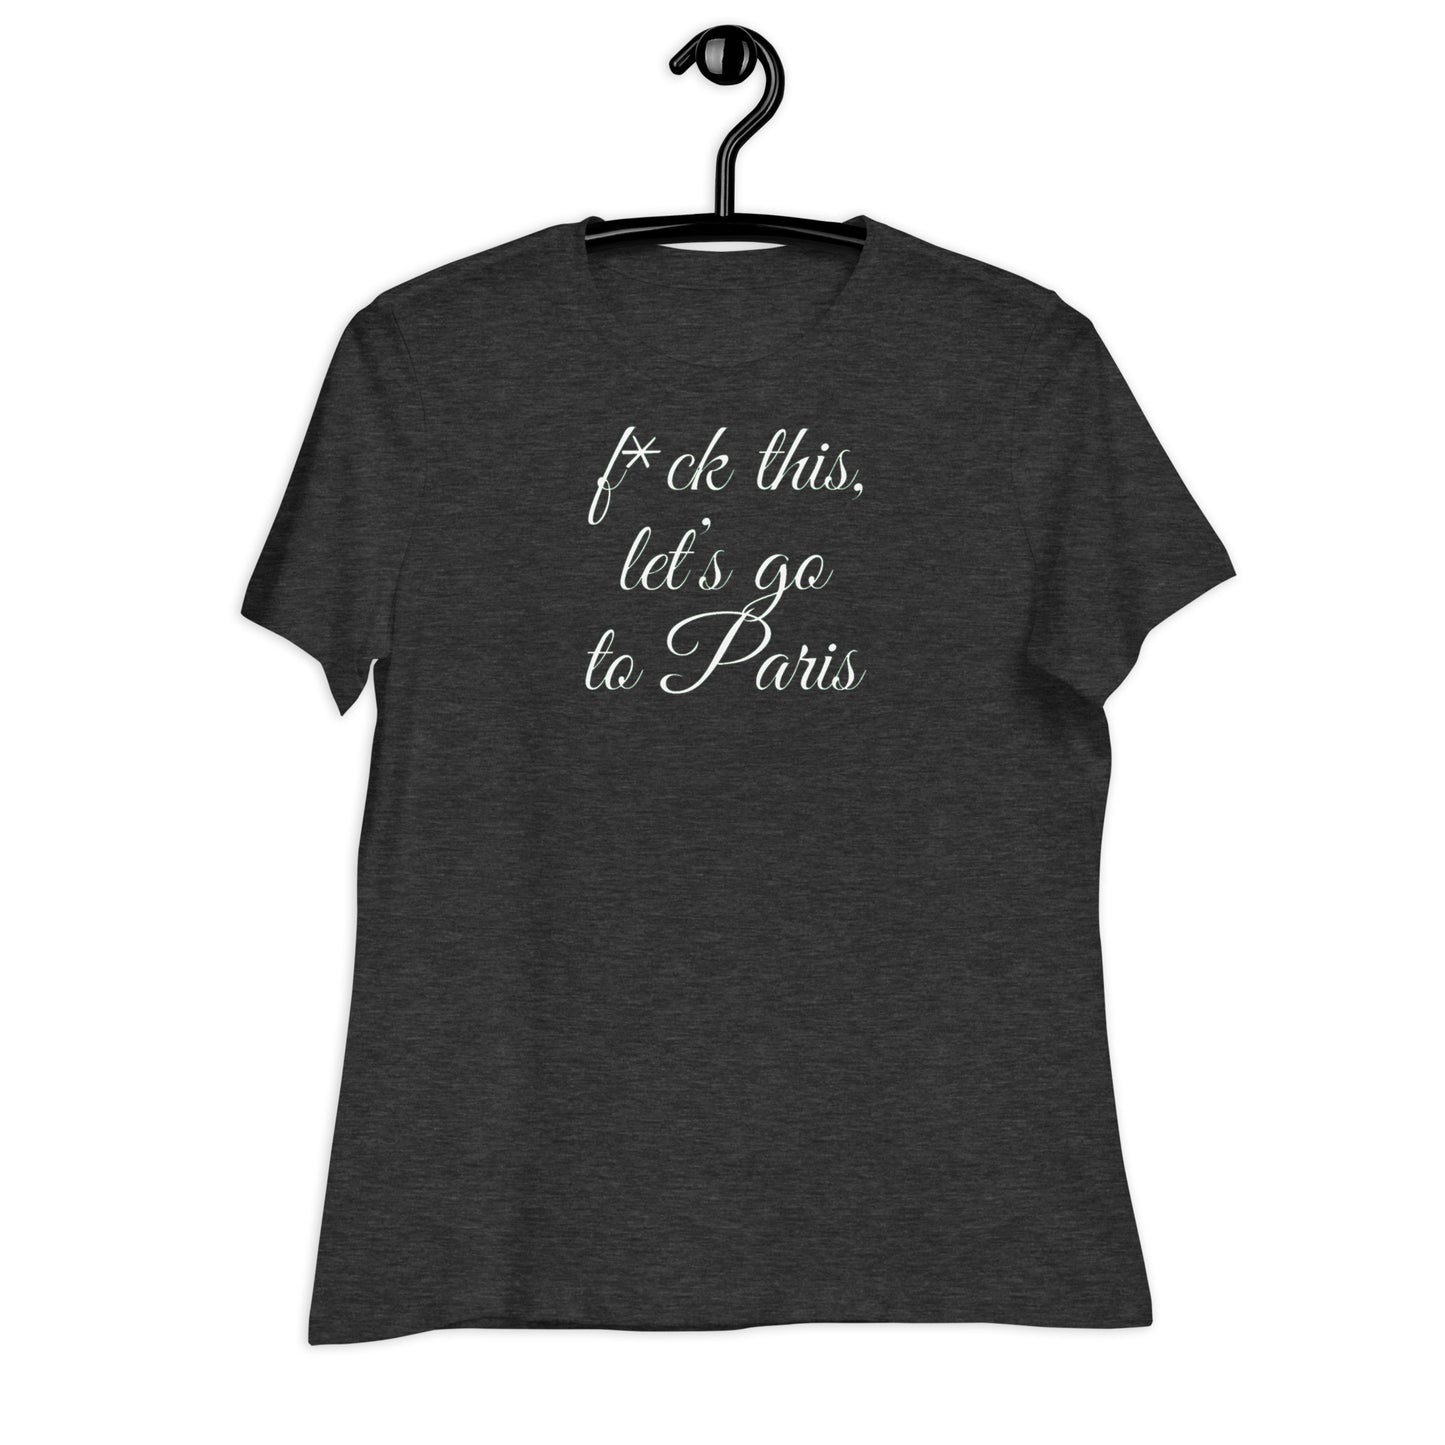 F*CK THIS LET'S GO TO PARIS French woman's relaxed travel t-shirt, france, couture, paris, sexy, French Kiss Pop Art, Chic